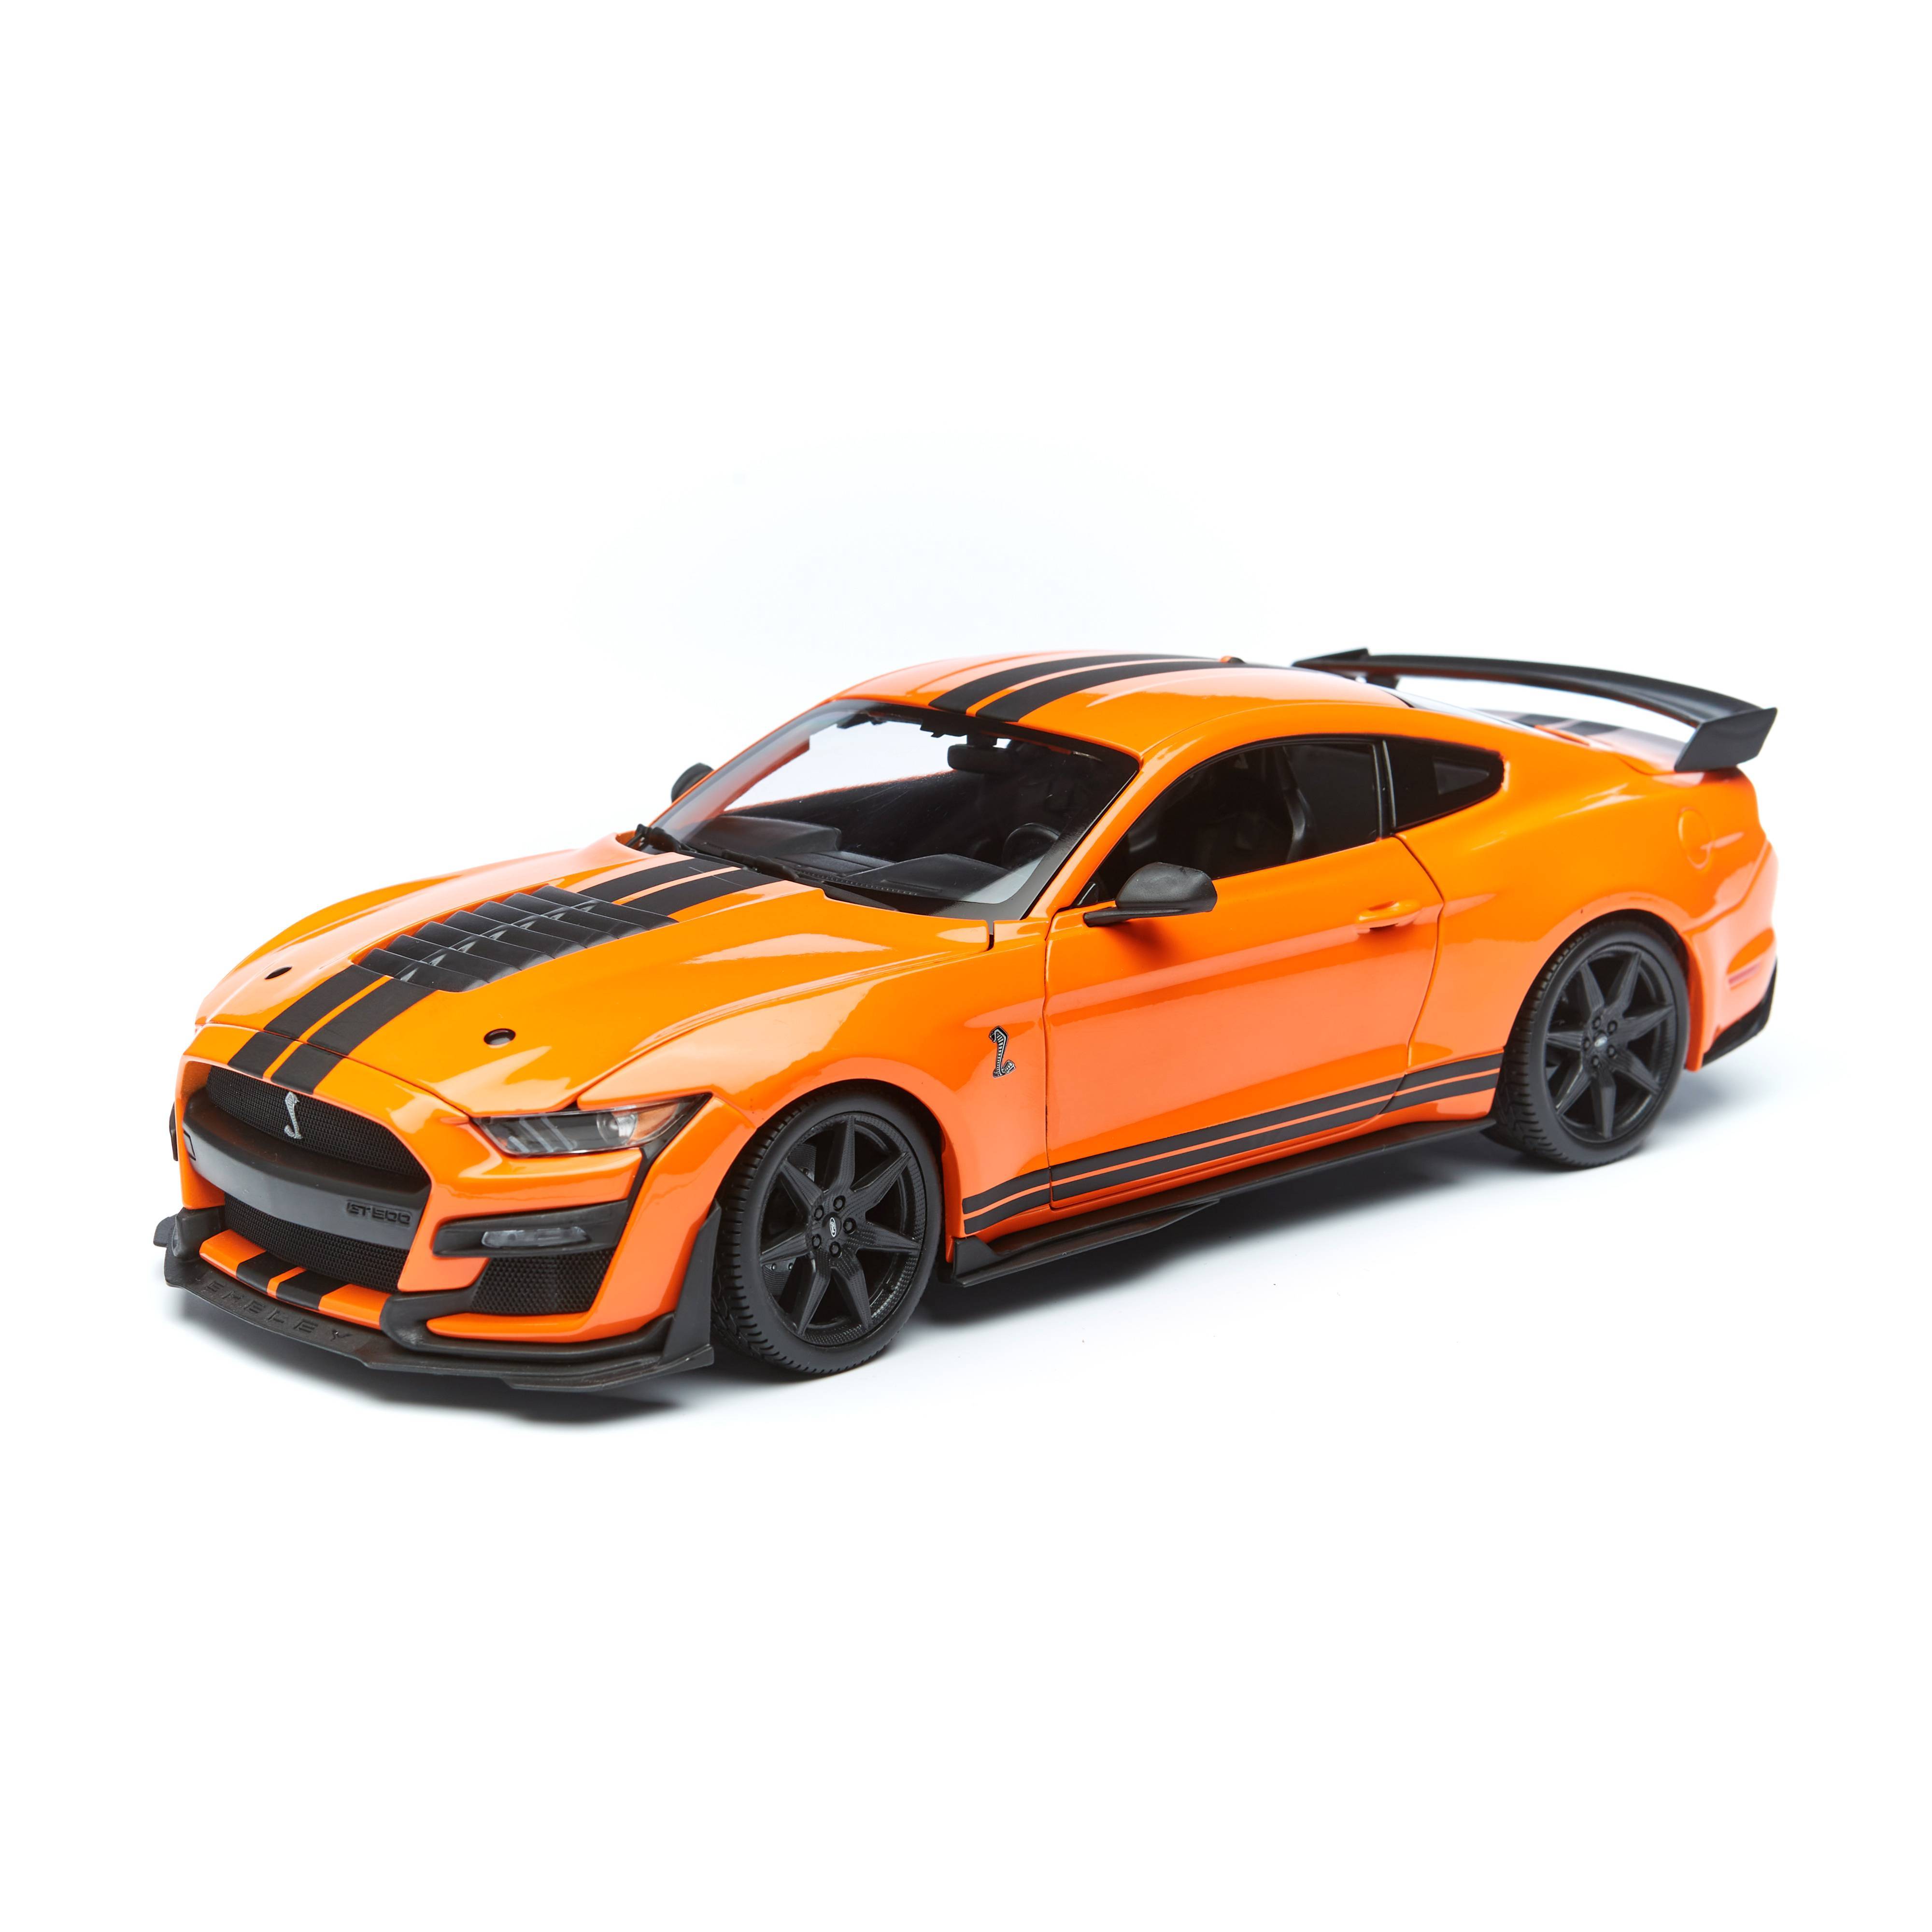 Maisto Машинка Ford Shelby GT500 2020, 1:18 оранжевая 31388 maisto 1 24 2020 mustang shelby gt500 orange static die cast vehicles collectible model car toys gift collection